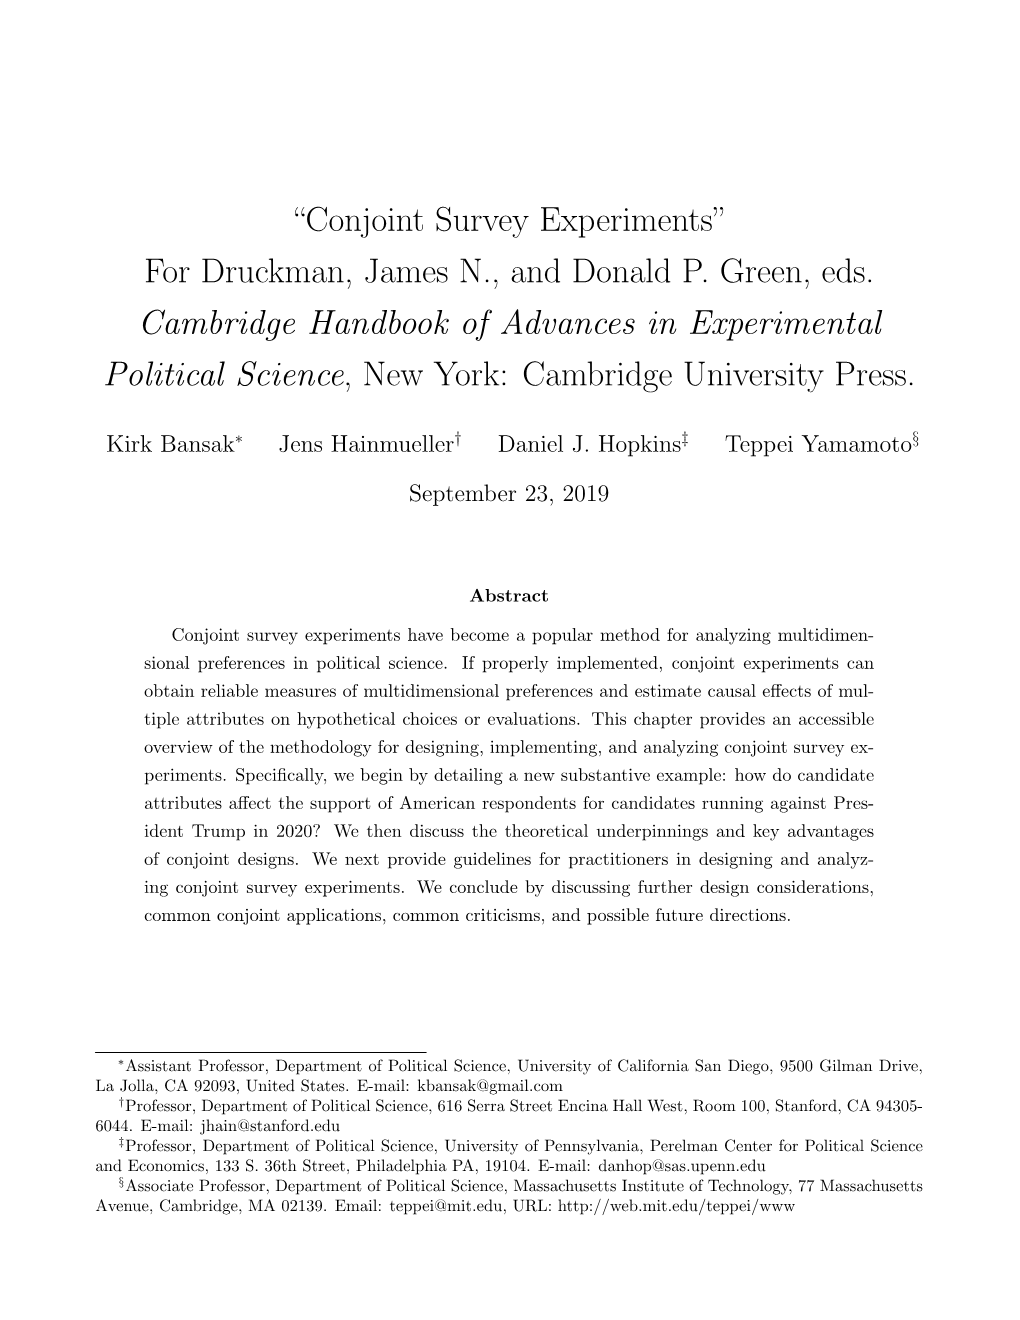 “Conjoint Survey Experiments” for Druckman, James N., and Donald P